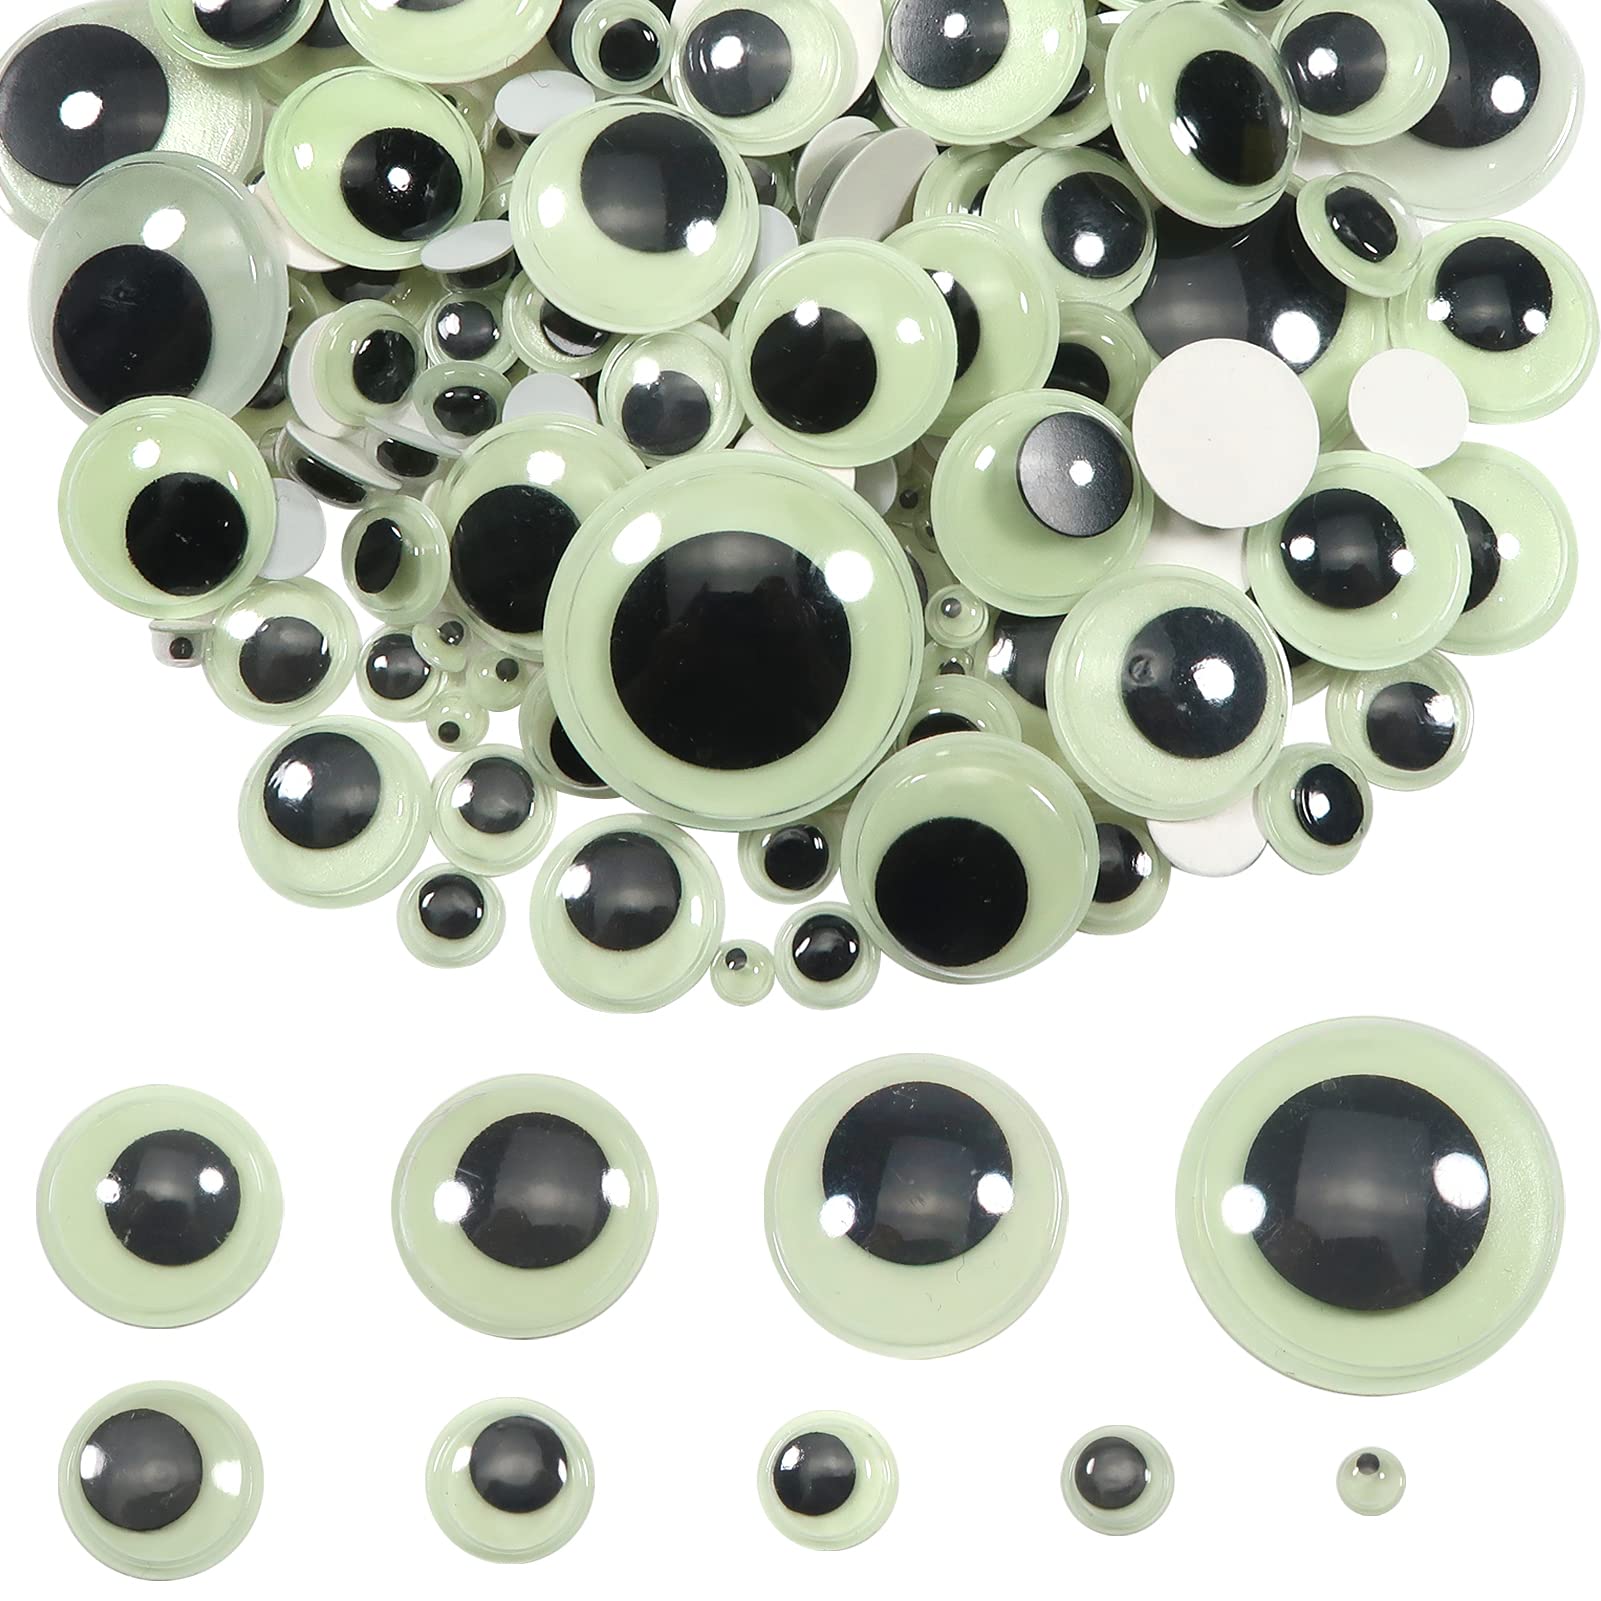 TOAOB 200pcs Glow in The Dark Wiggle Googly Eyes Self Adhesive Luminous Googly  Eyes Assorted Sizes Plastic Sticker Eyes for DIY Crafts Scrapbooking  Decoration